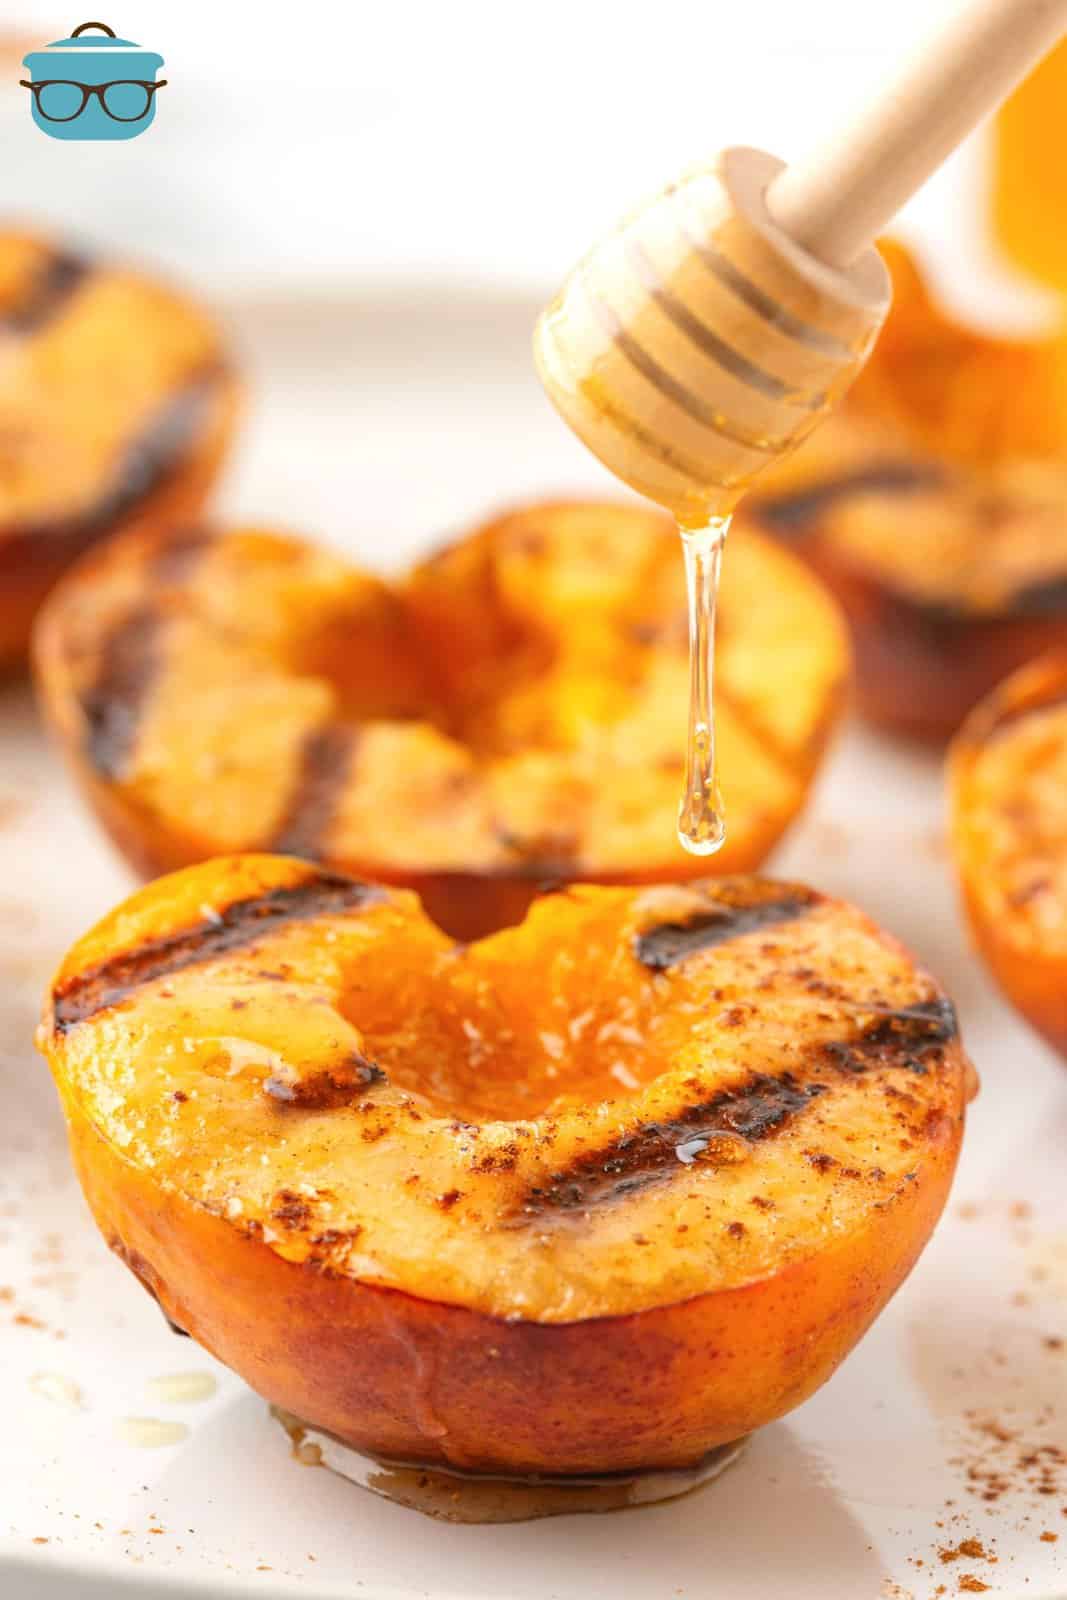 Honey being drizzled over Grilled Peaches.